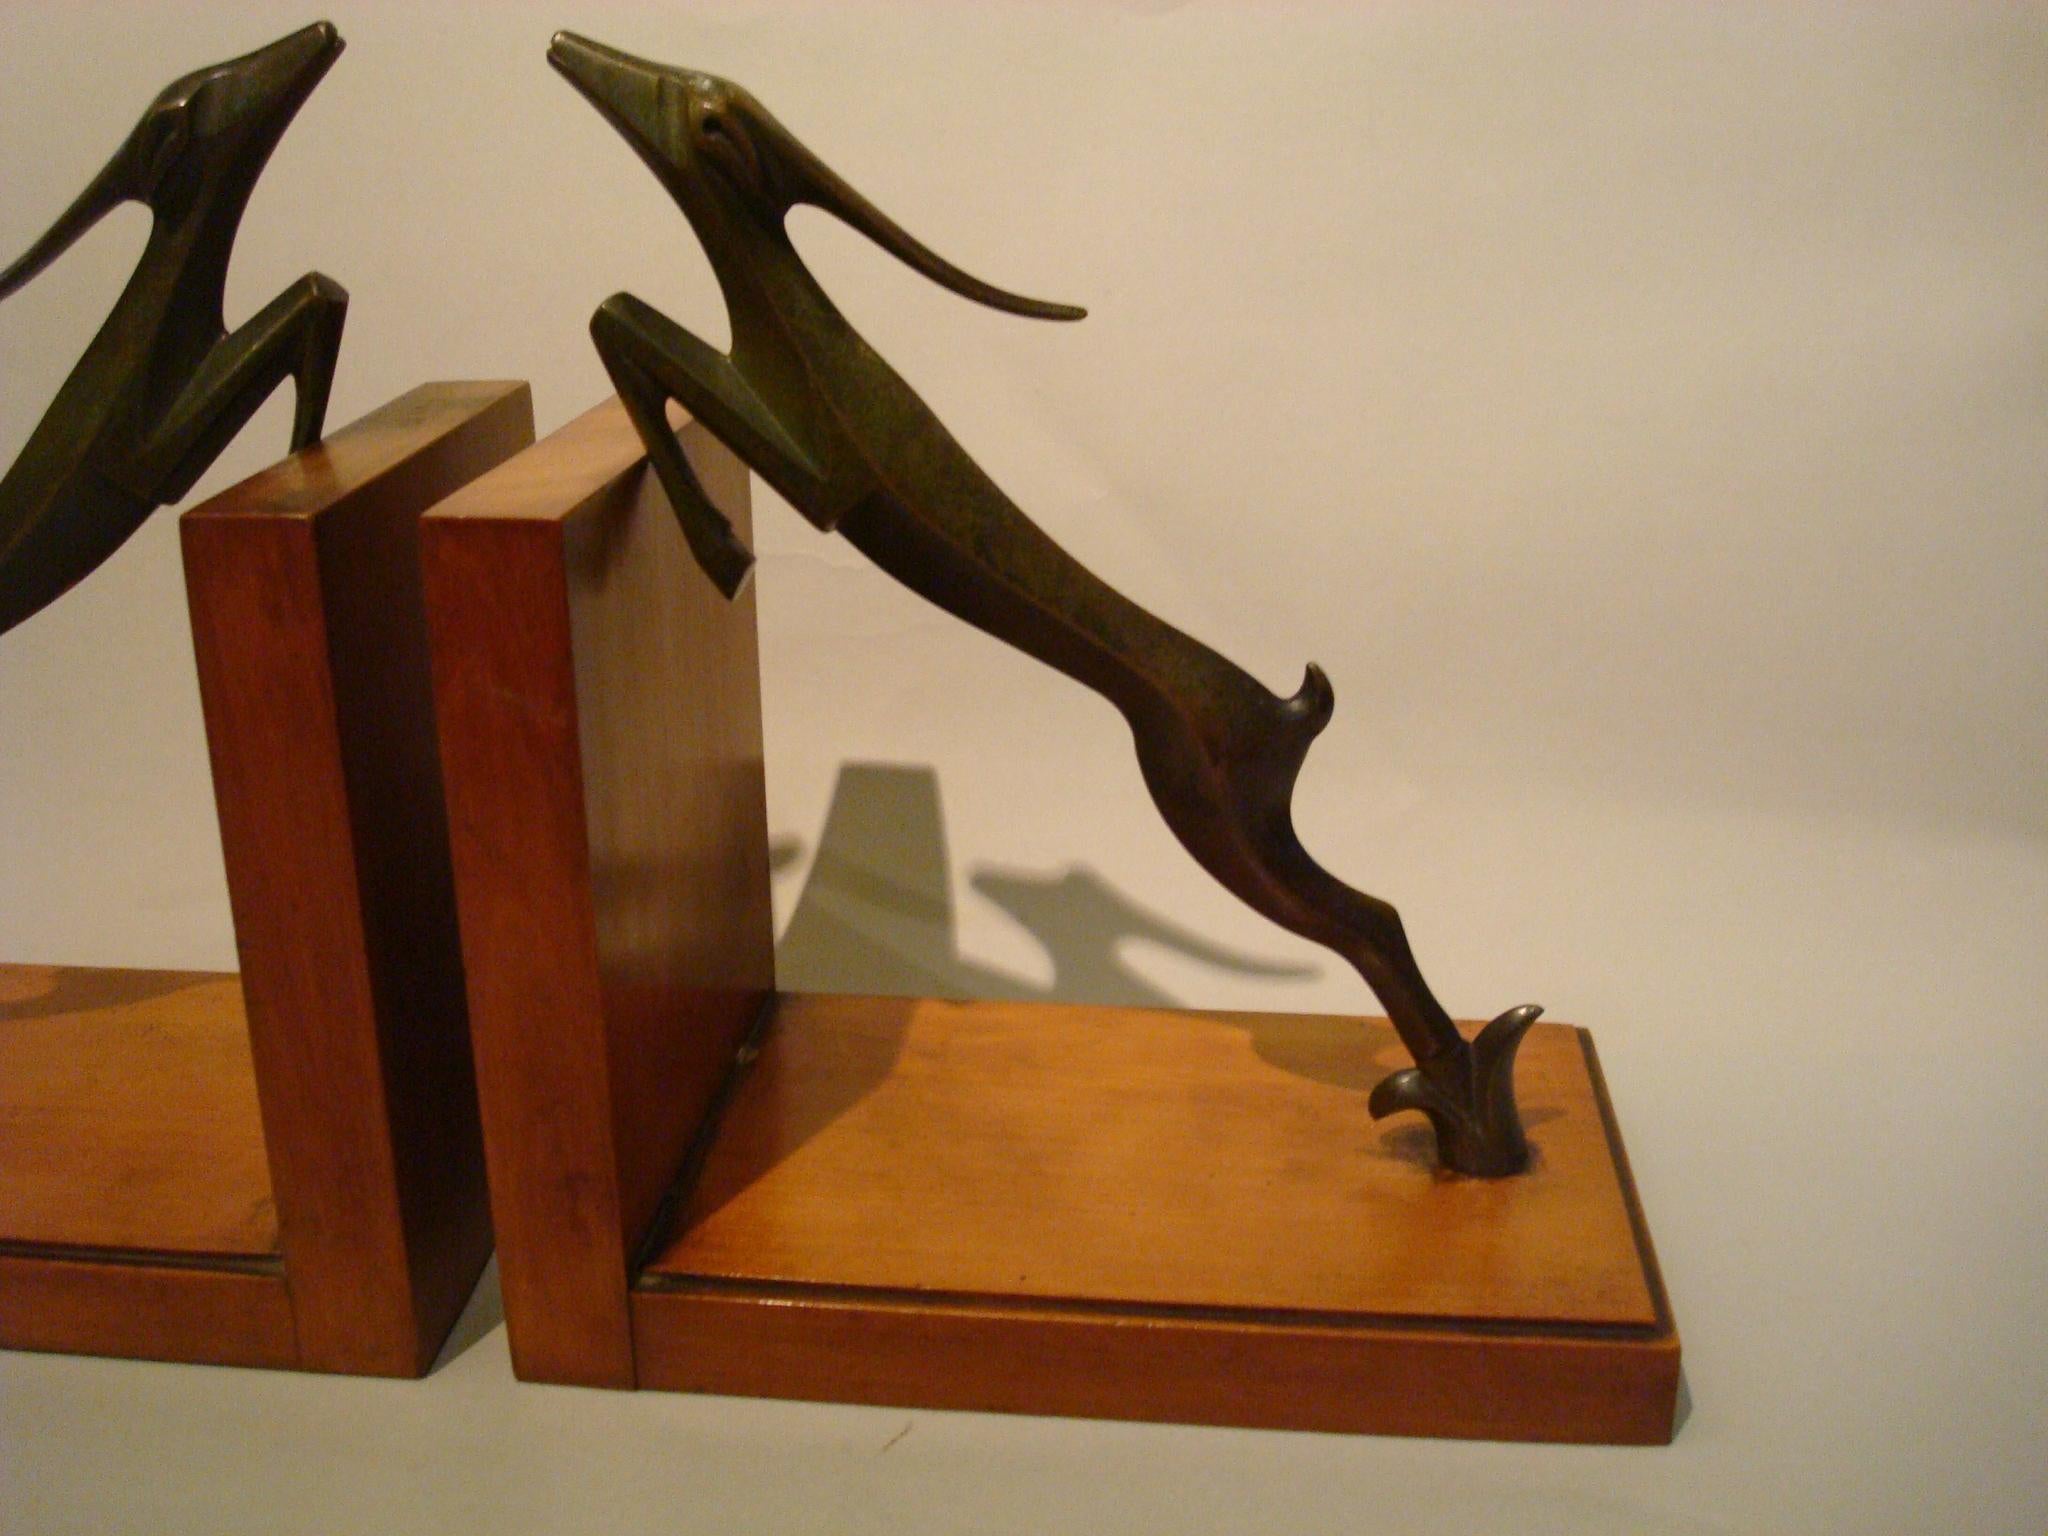 Art Deco bookends slim deer sculpture with wooden base.
They have the Hagenauer style.
Art Deco dark green patinated bronze leaping deer bookends
Unsigned.